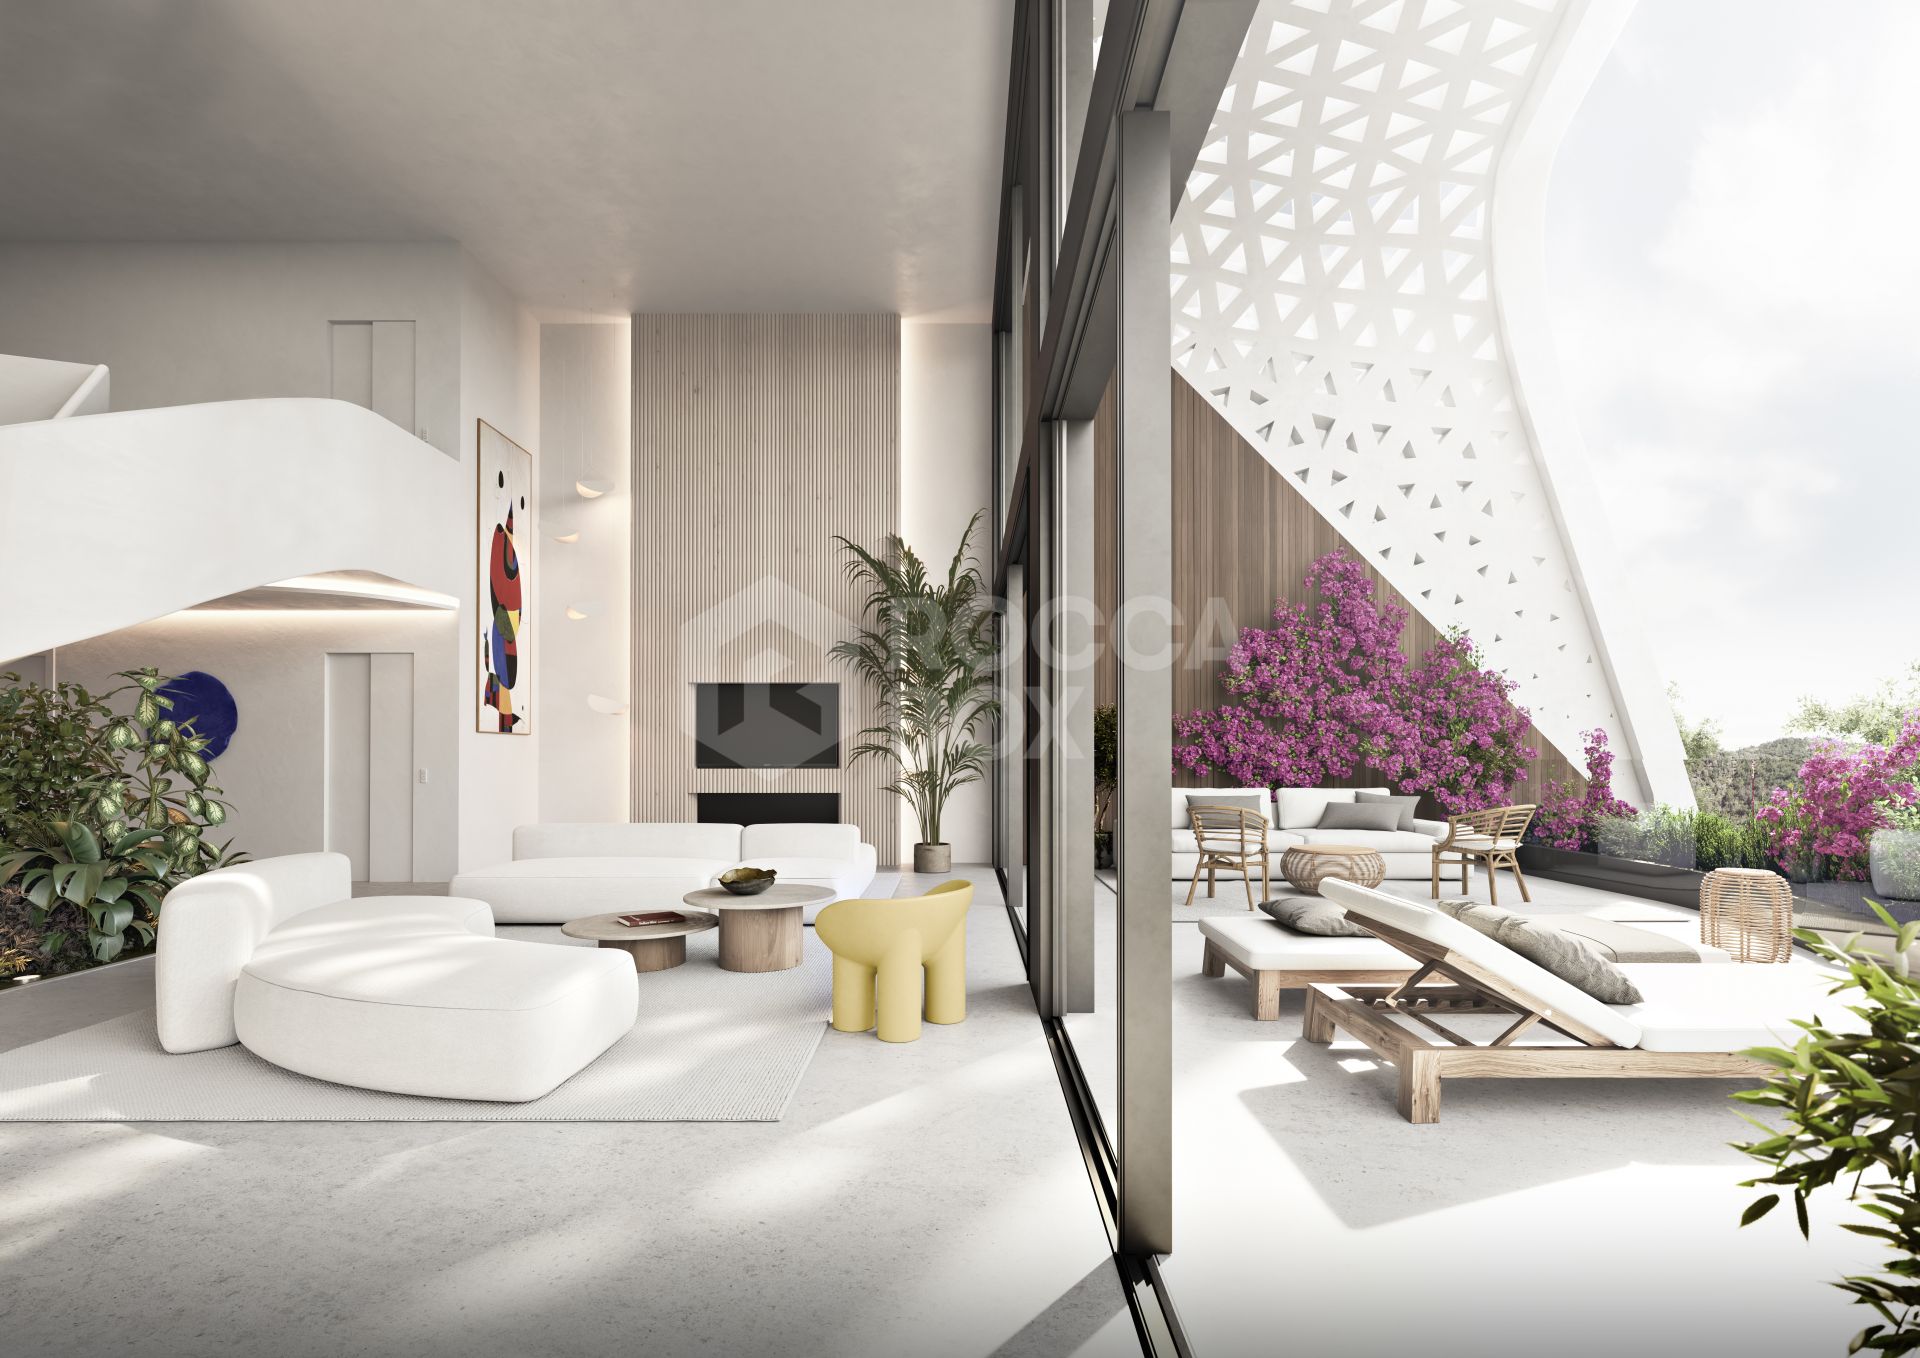 Sphere, exclusive apartments and duplex penthouses integrated in nature in Sotogrande.